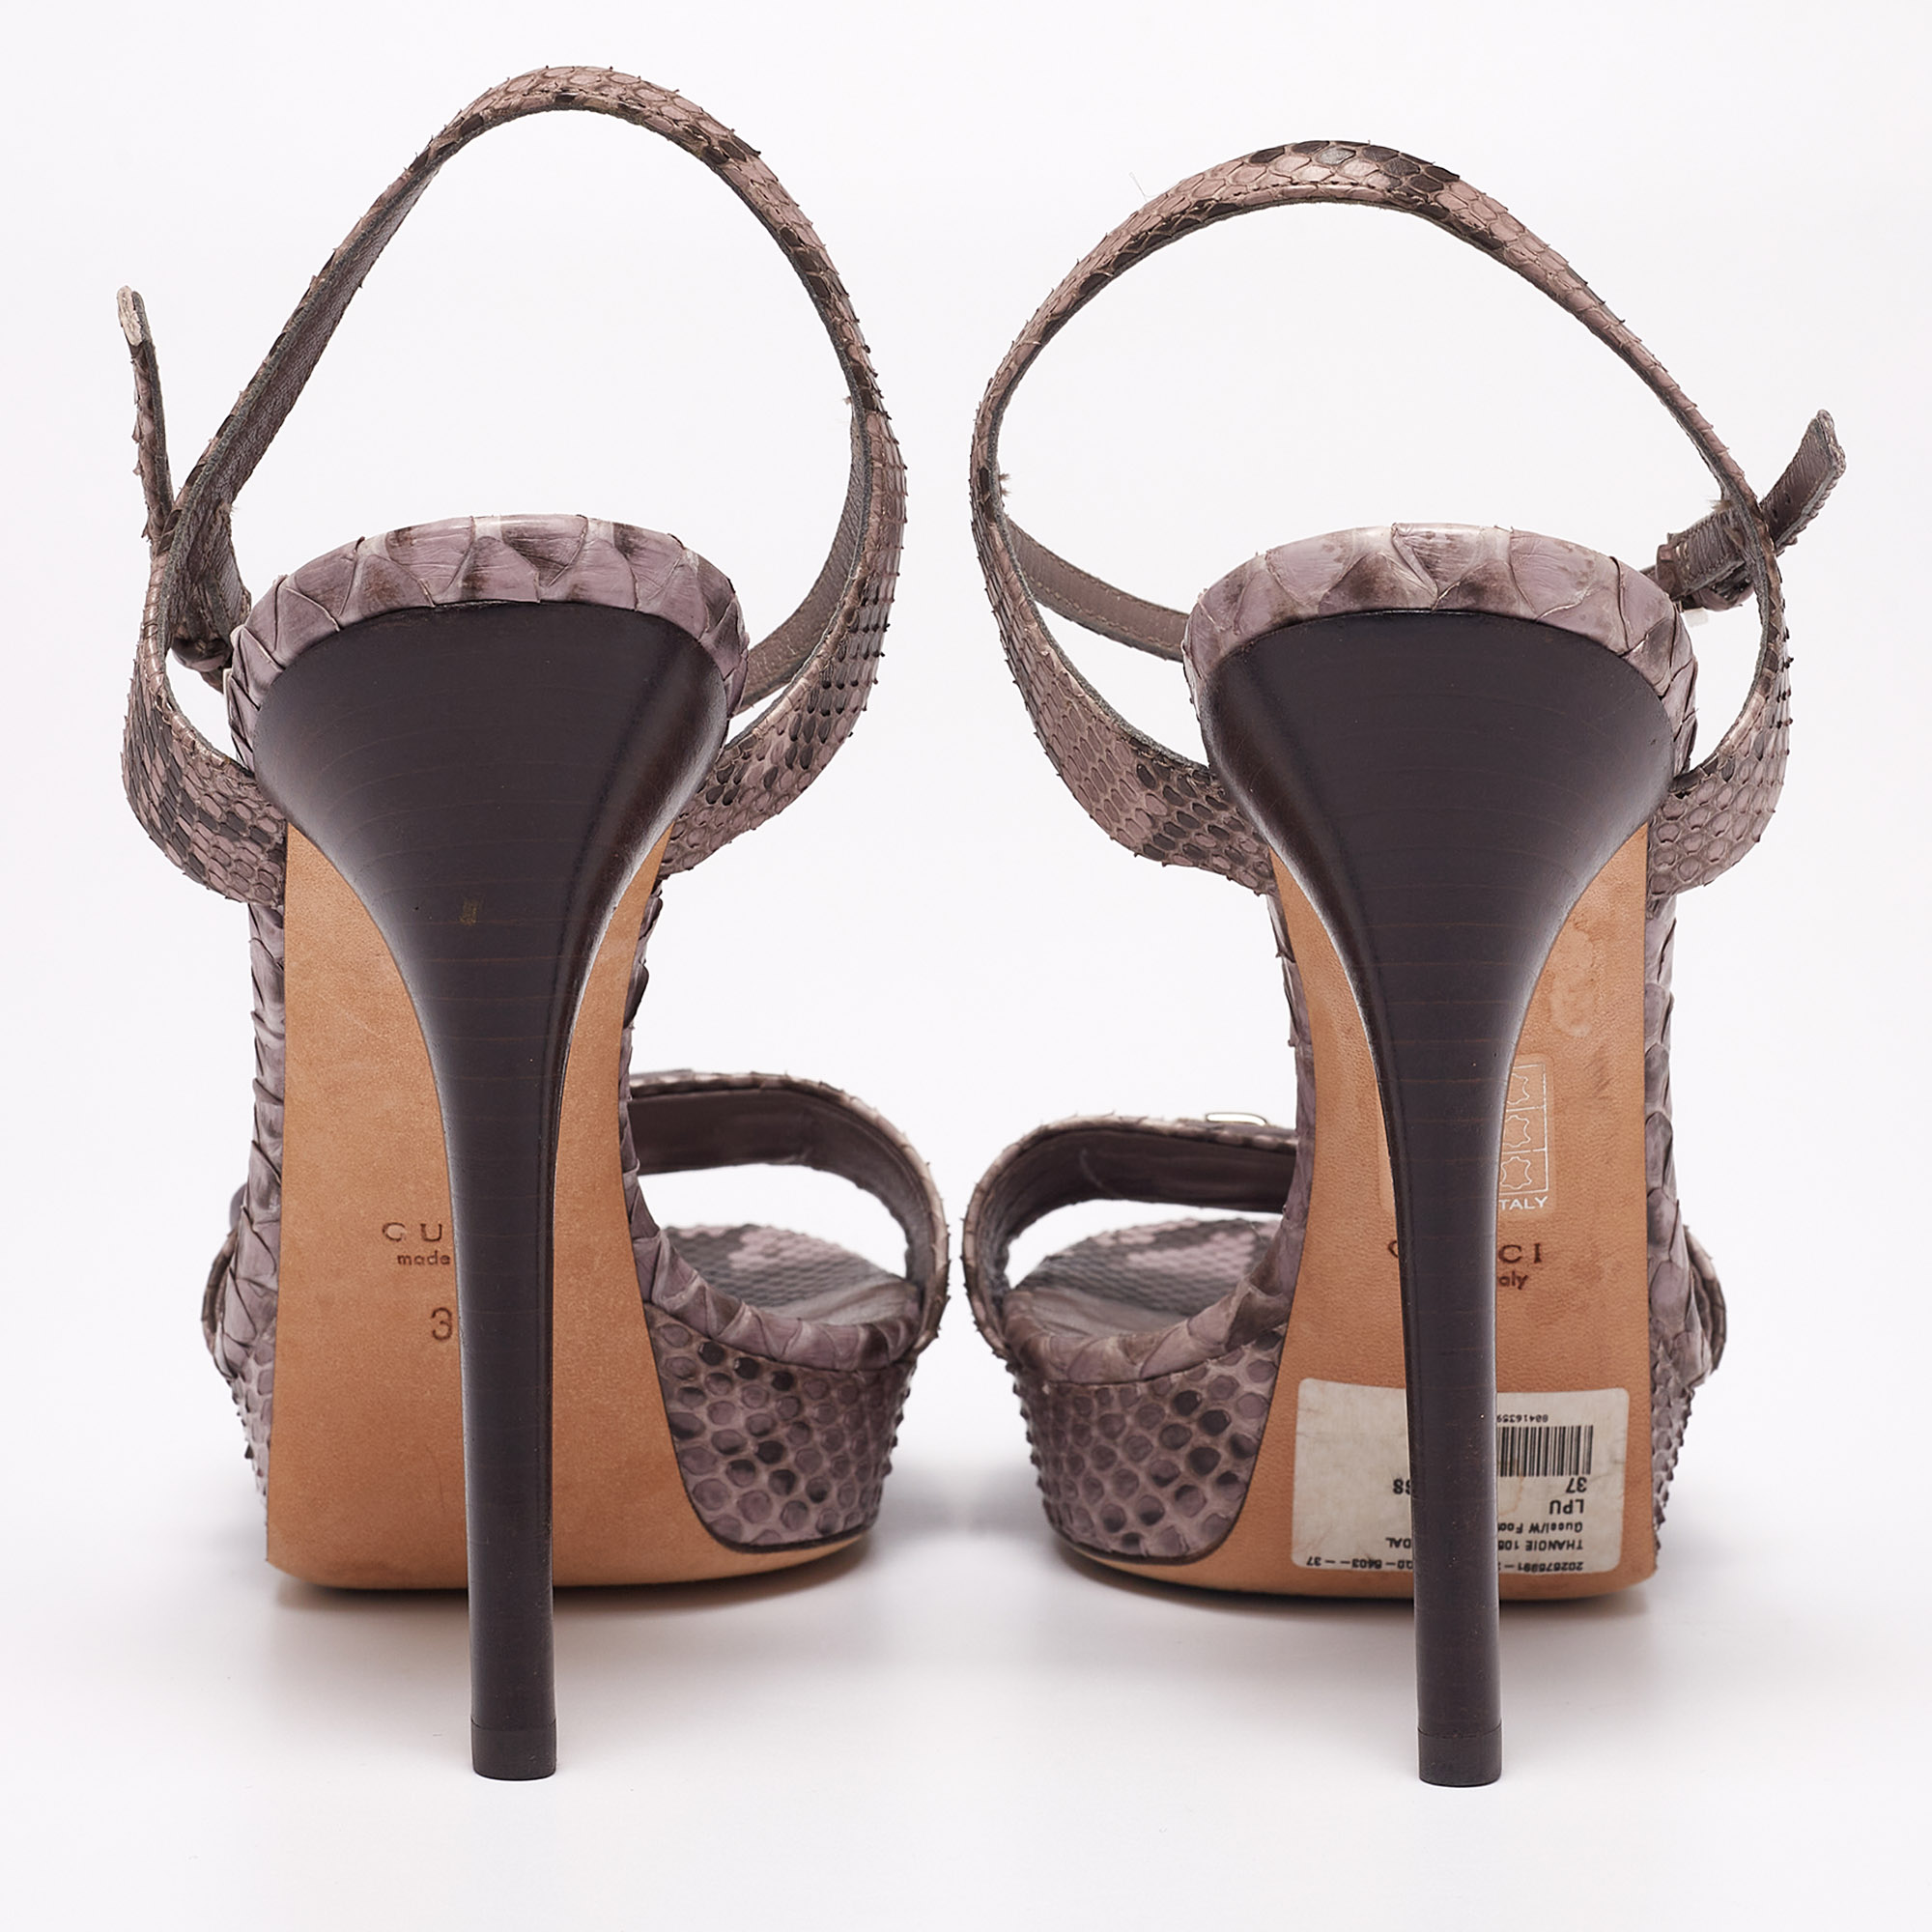 Gucci Purple/Brown Python Leather Bamboo Ankle Straps Platform Sandals Size 37